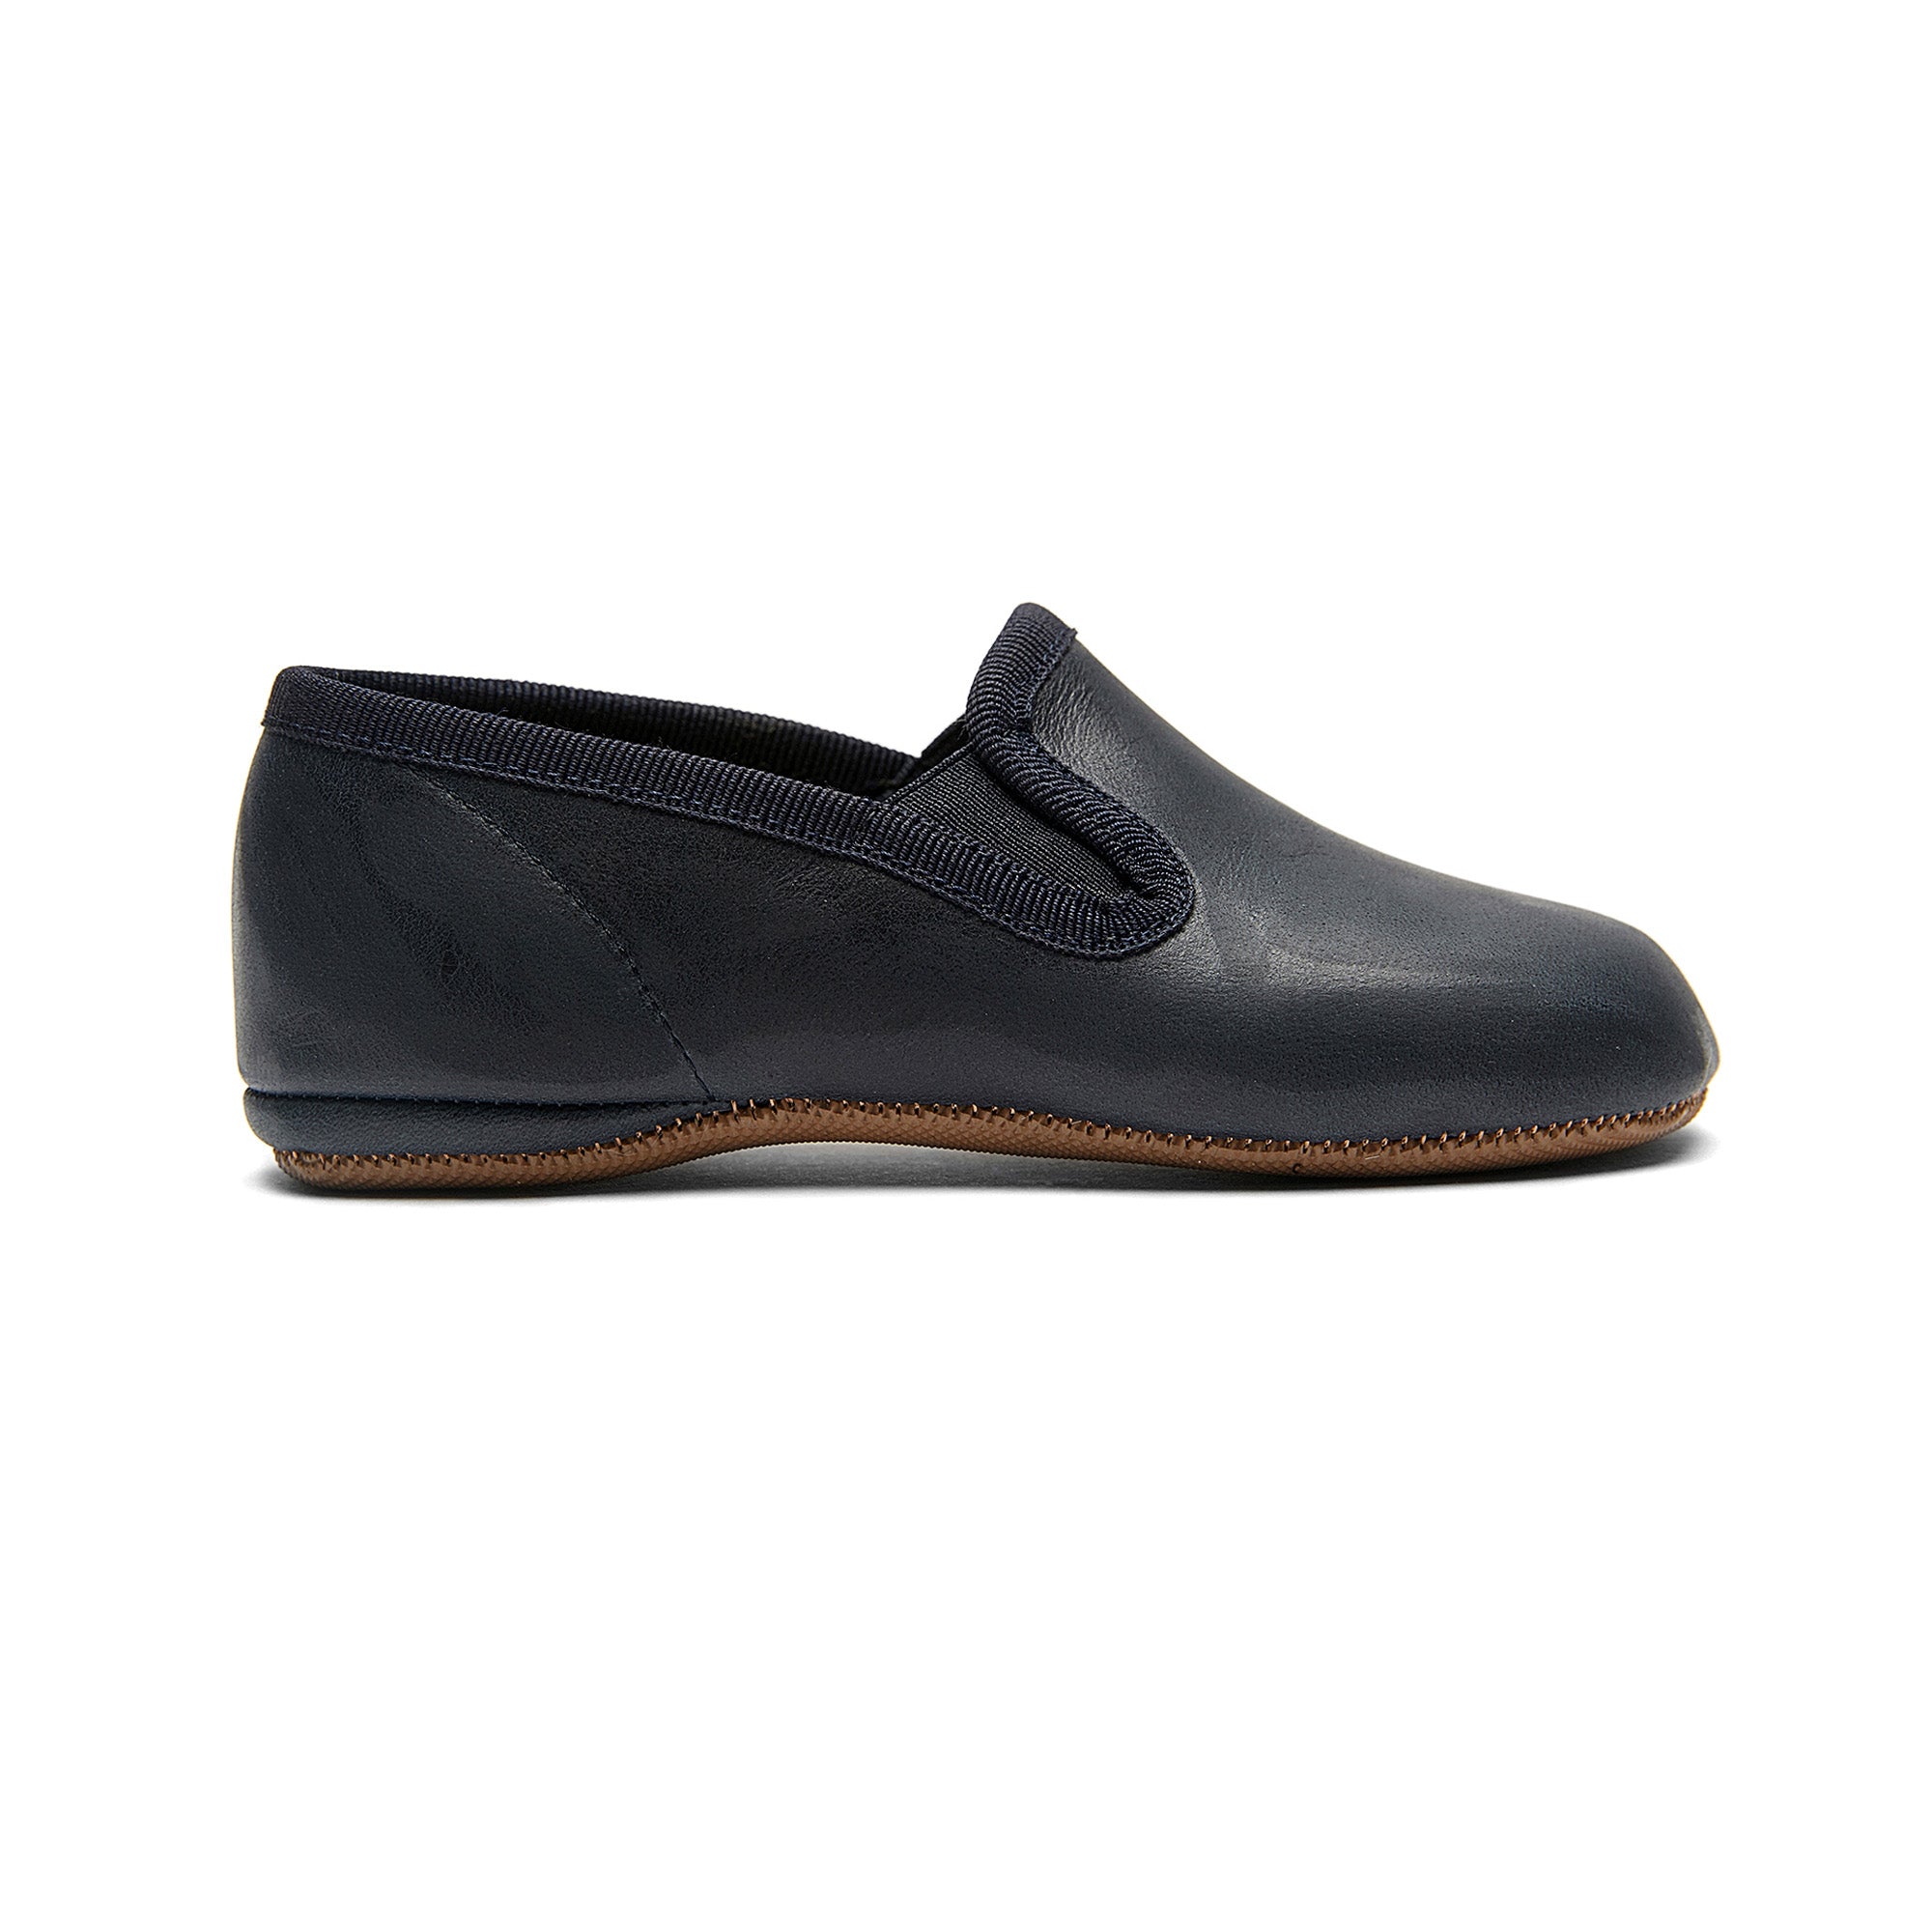 Boys & Girls Navy Leather Shoes